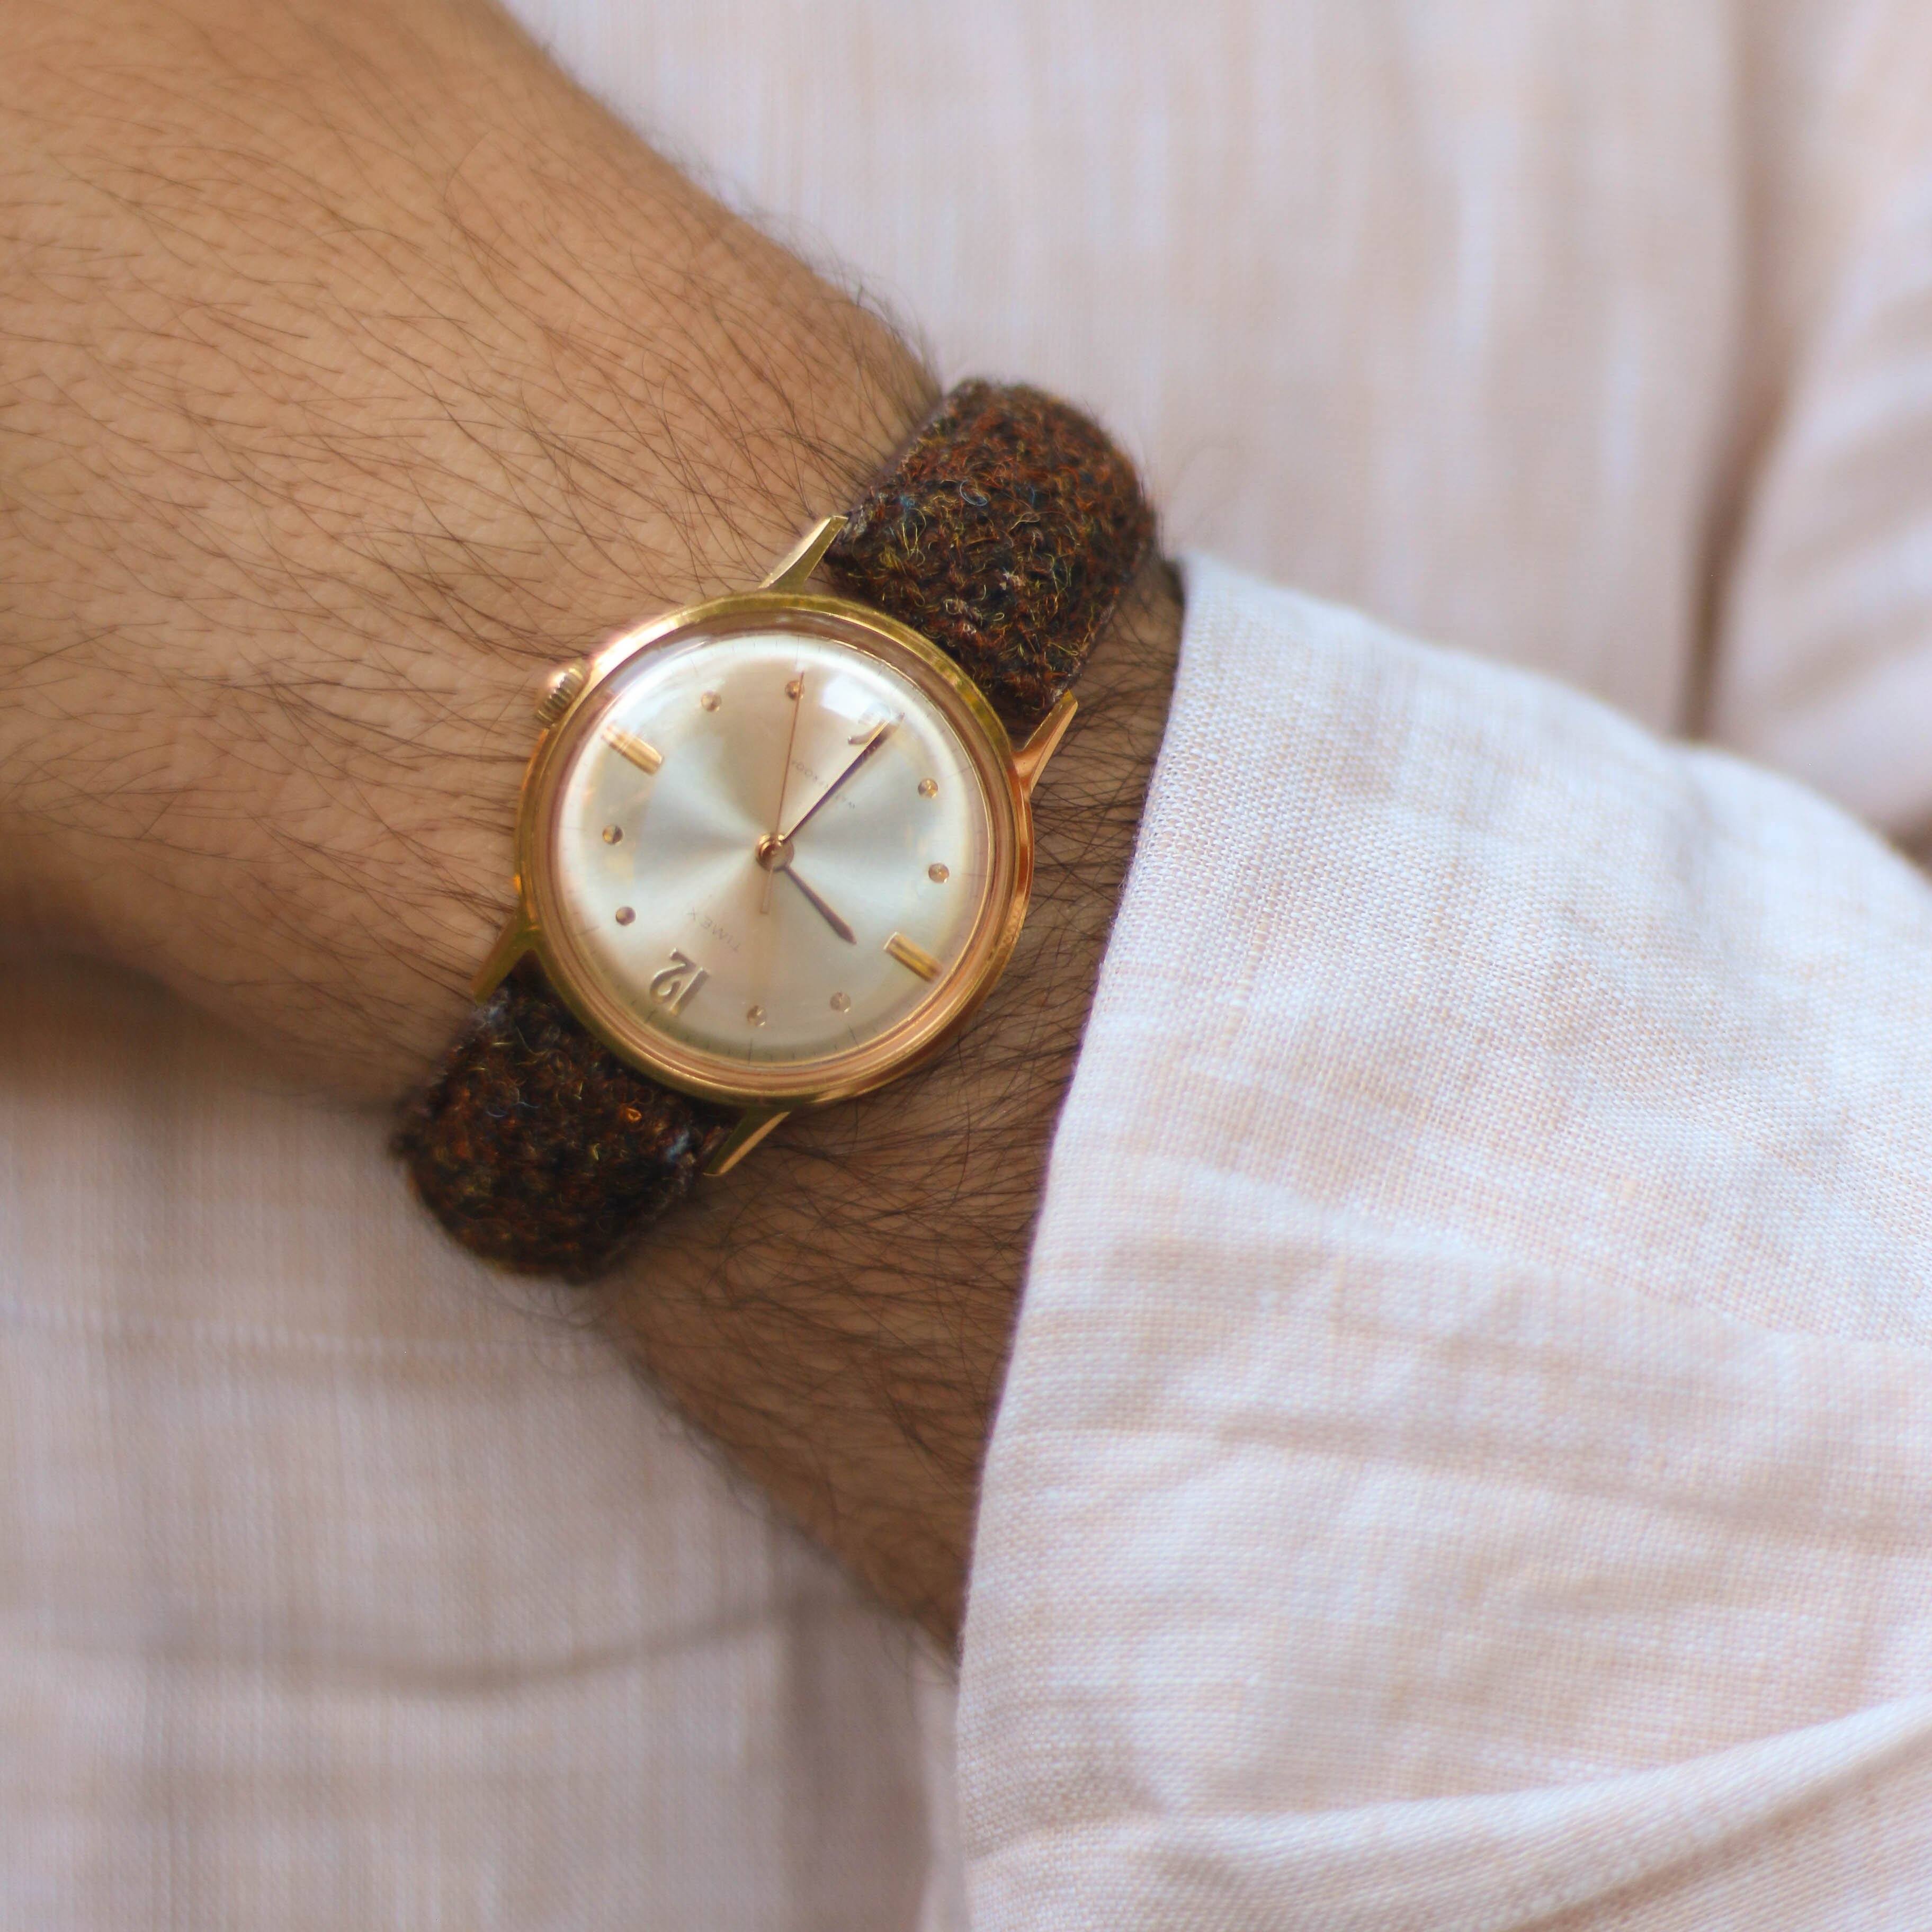 What do u think of this Timex on Harris Tweed? Photo by #varioeveryday member @the.mensch